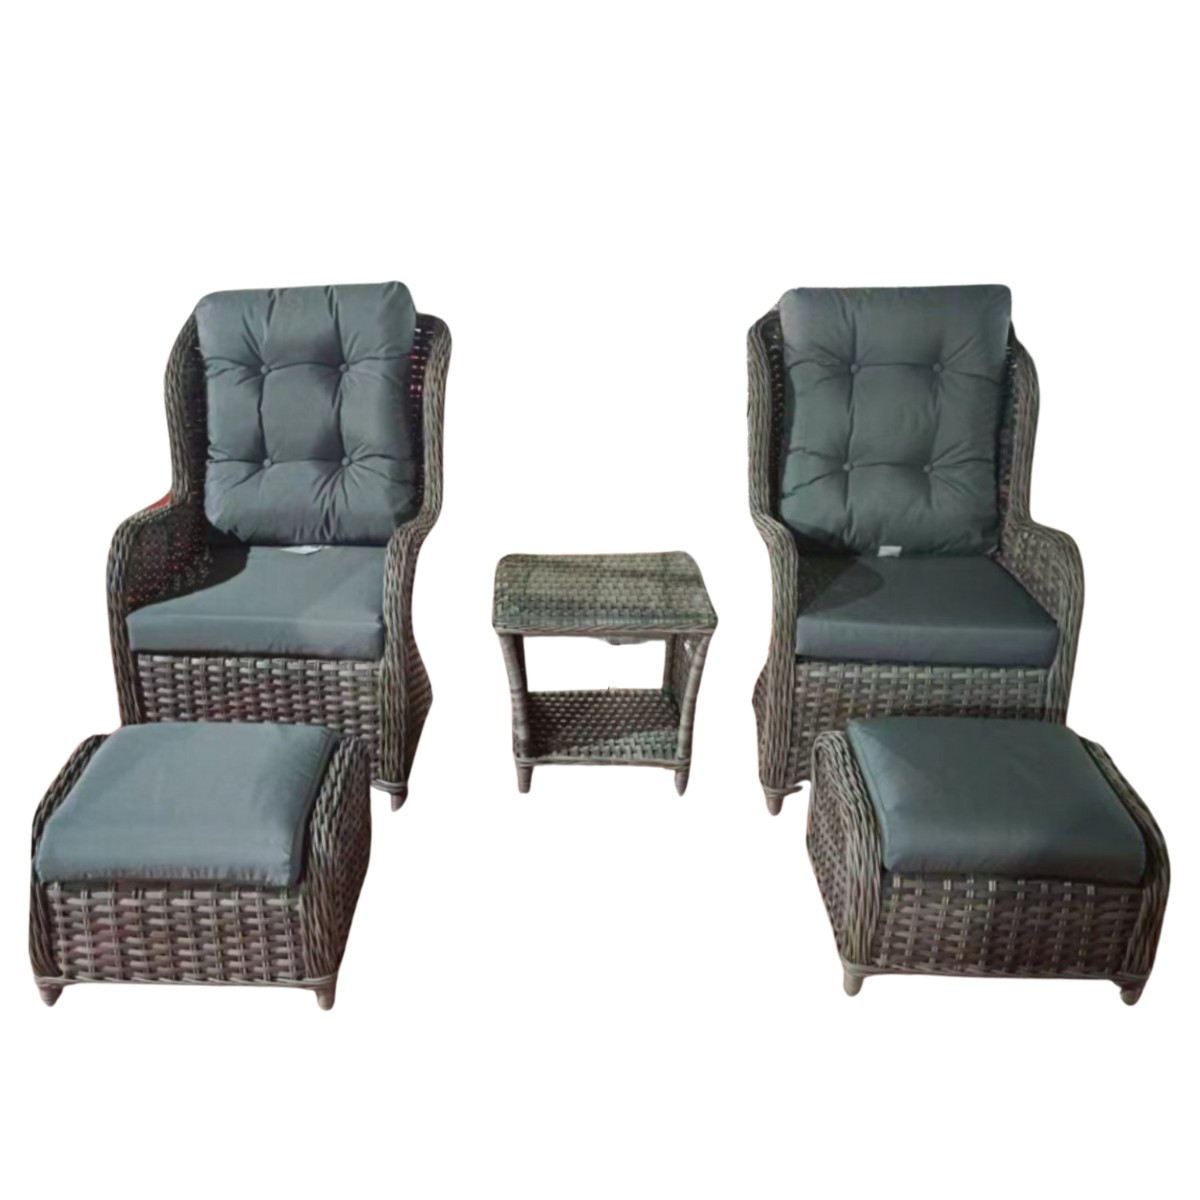 Aghadoe Garden Chairs and Footstools With Table